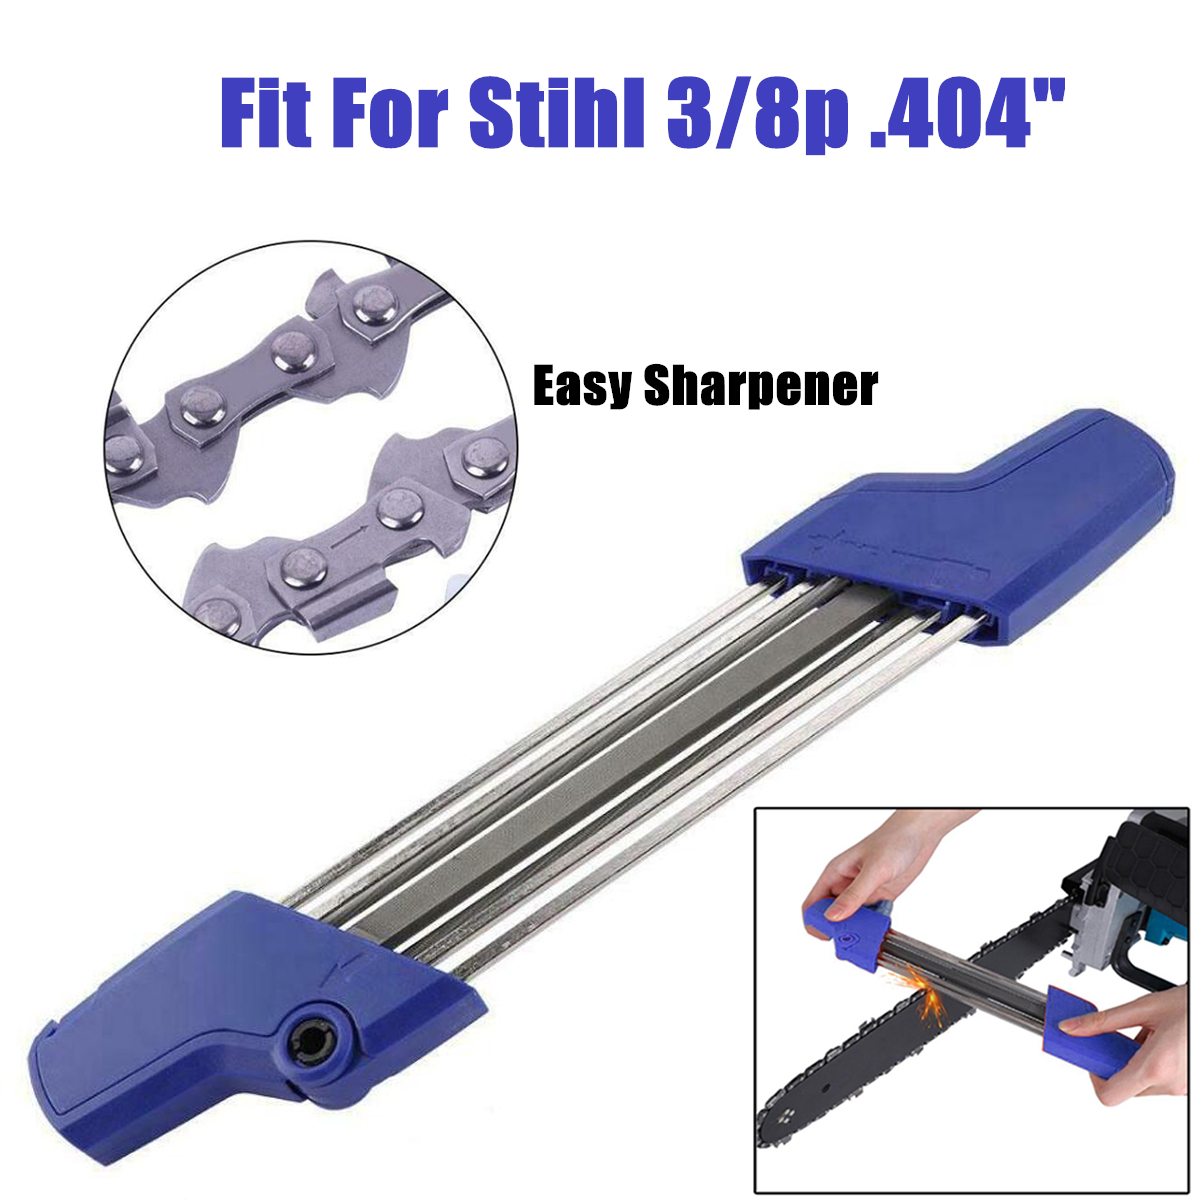 

Blue 2 IN 1 7/32 5.5mm Chainsaw Chain Quick File Sharpener Chain Saw Sharpening Kit For Stihl 3/8p .404 Inch